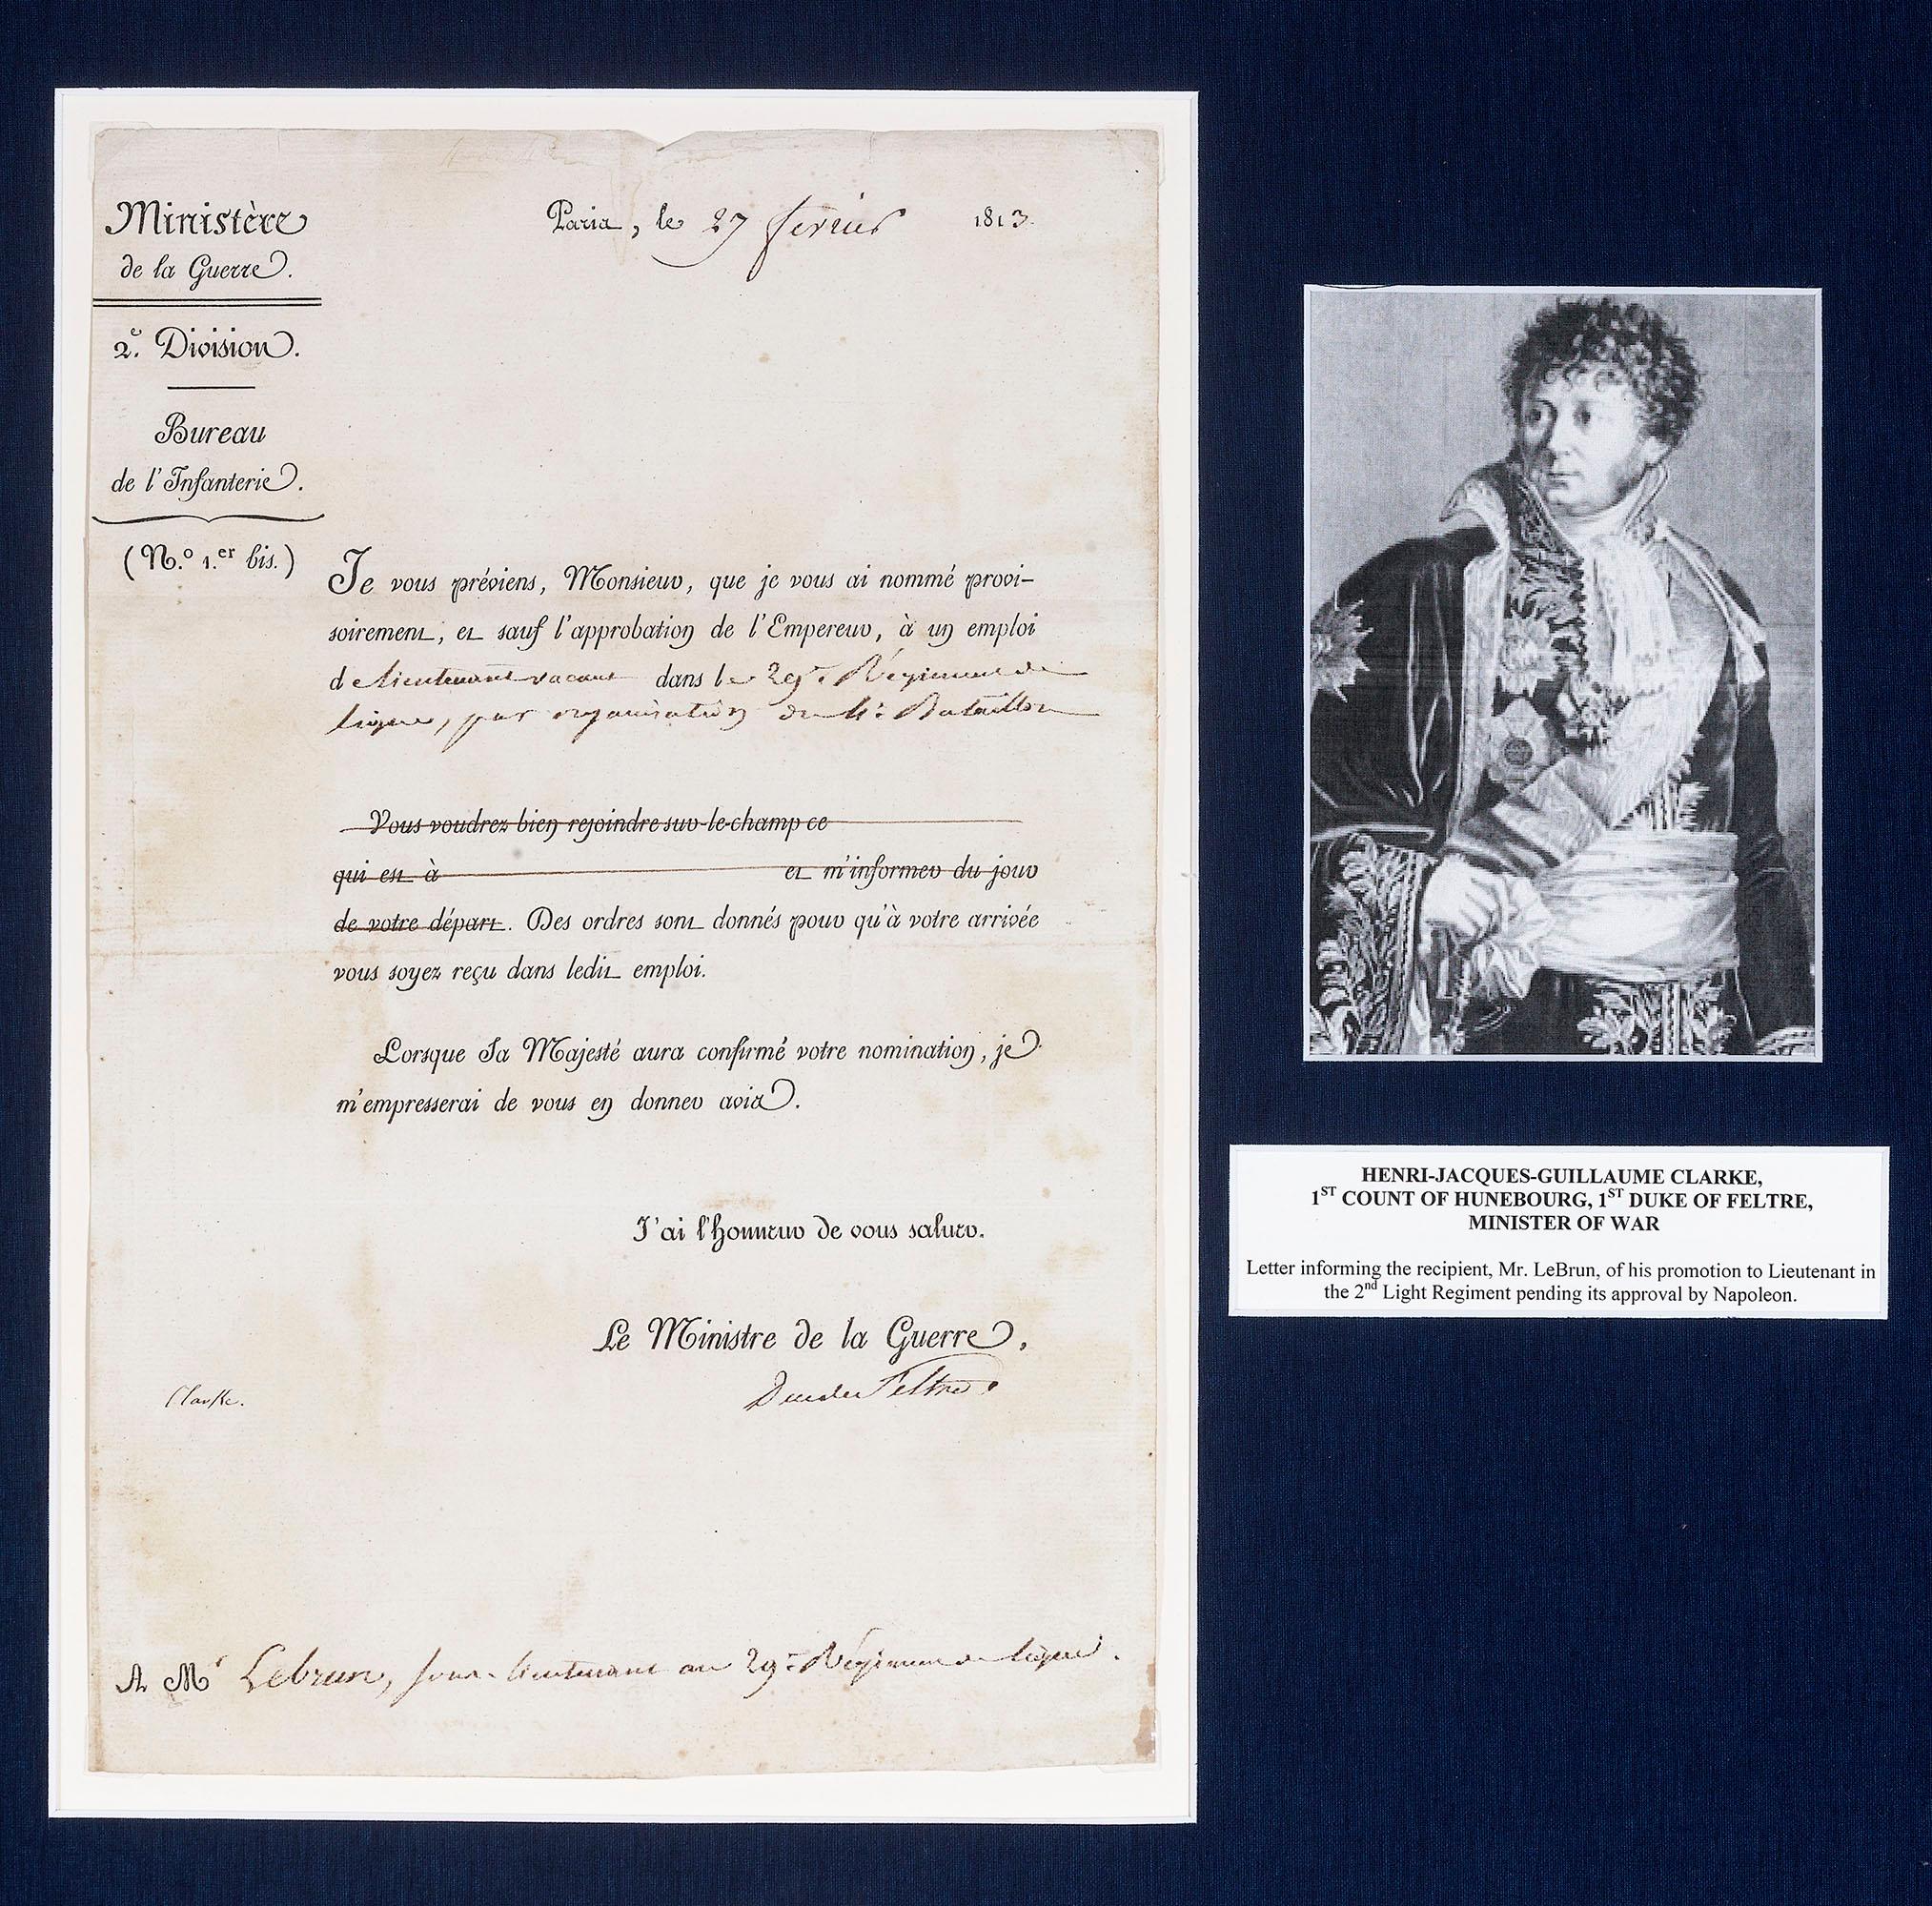 This historically significant collection of letters is from the Ministers and trusted Generals serving Napoleon Bonaparte during his reign as the French Emperor from 1804-1814, and the Hundred Days in 1815. Napoleon had structured his government